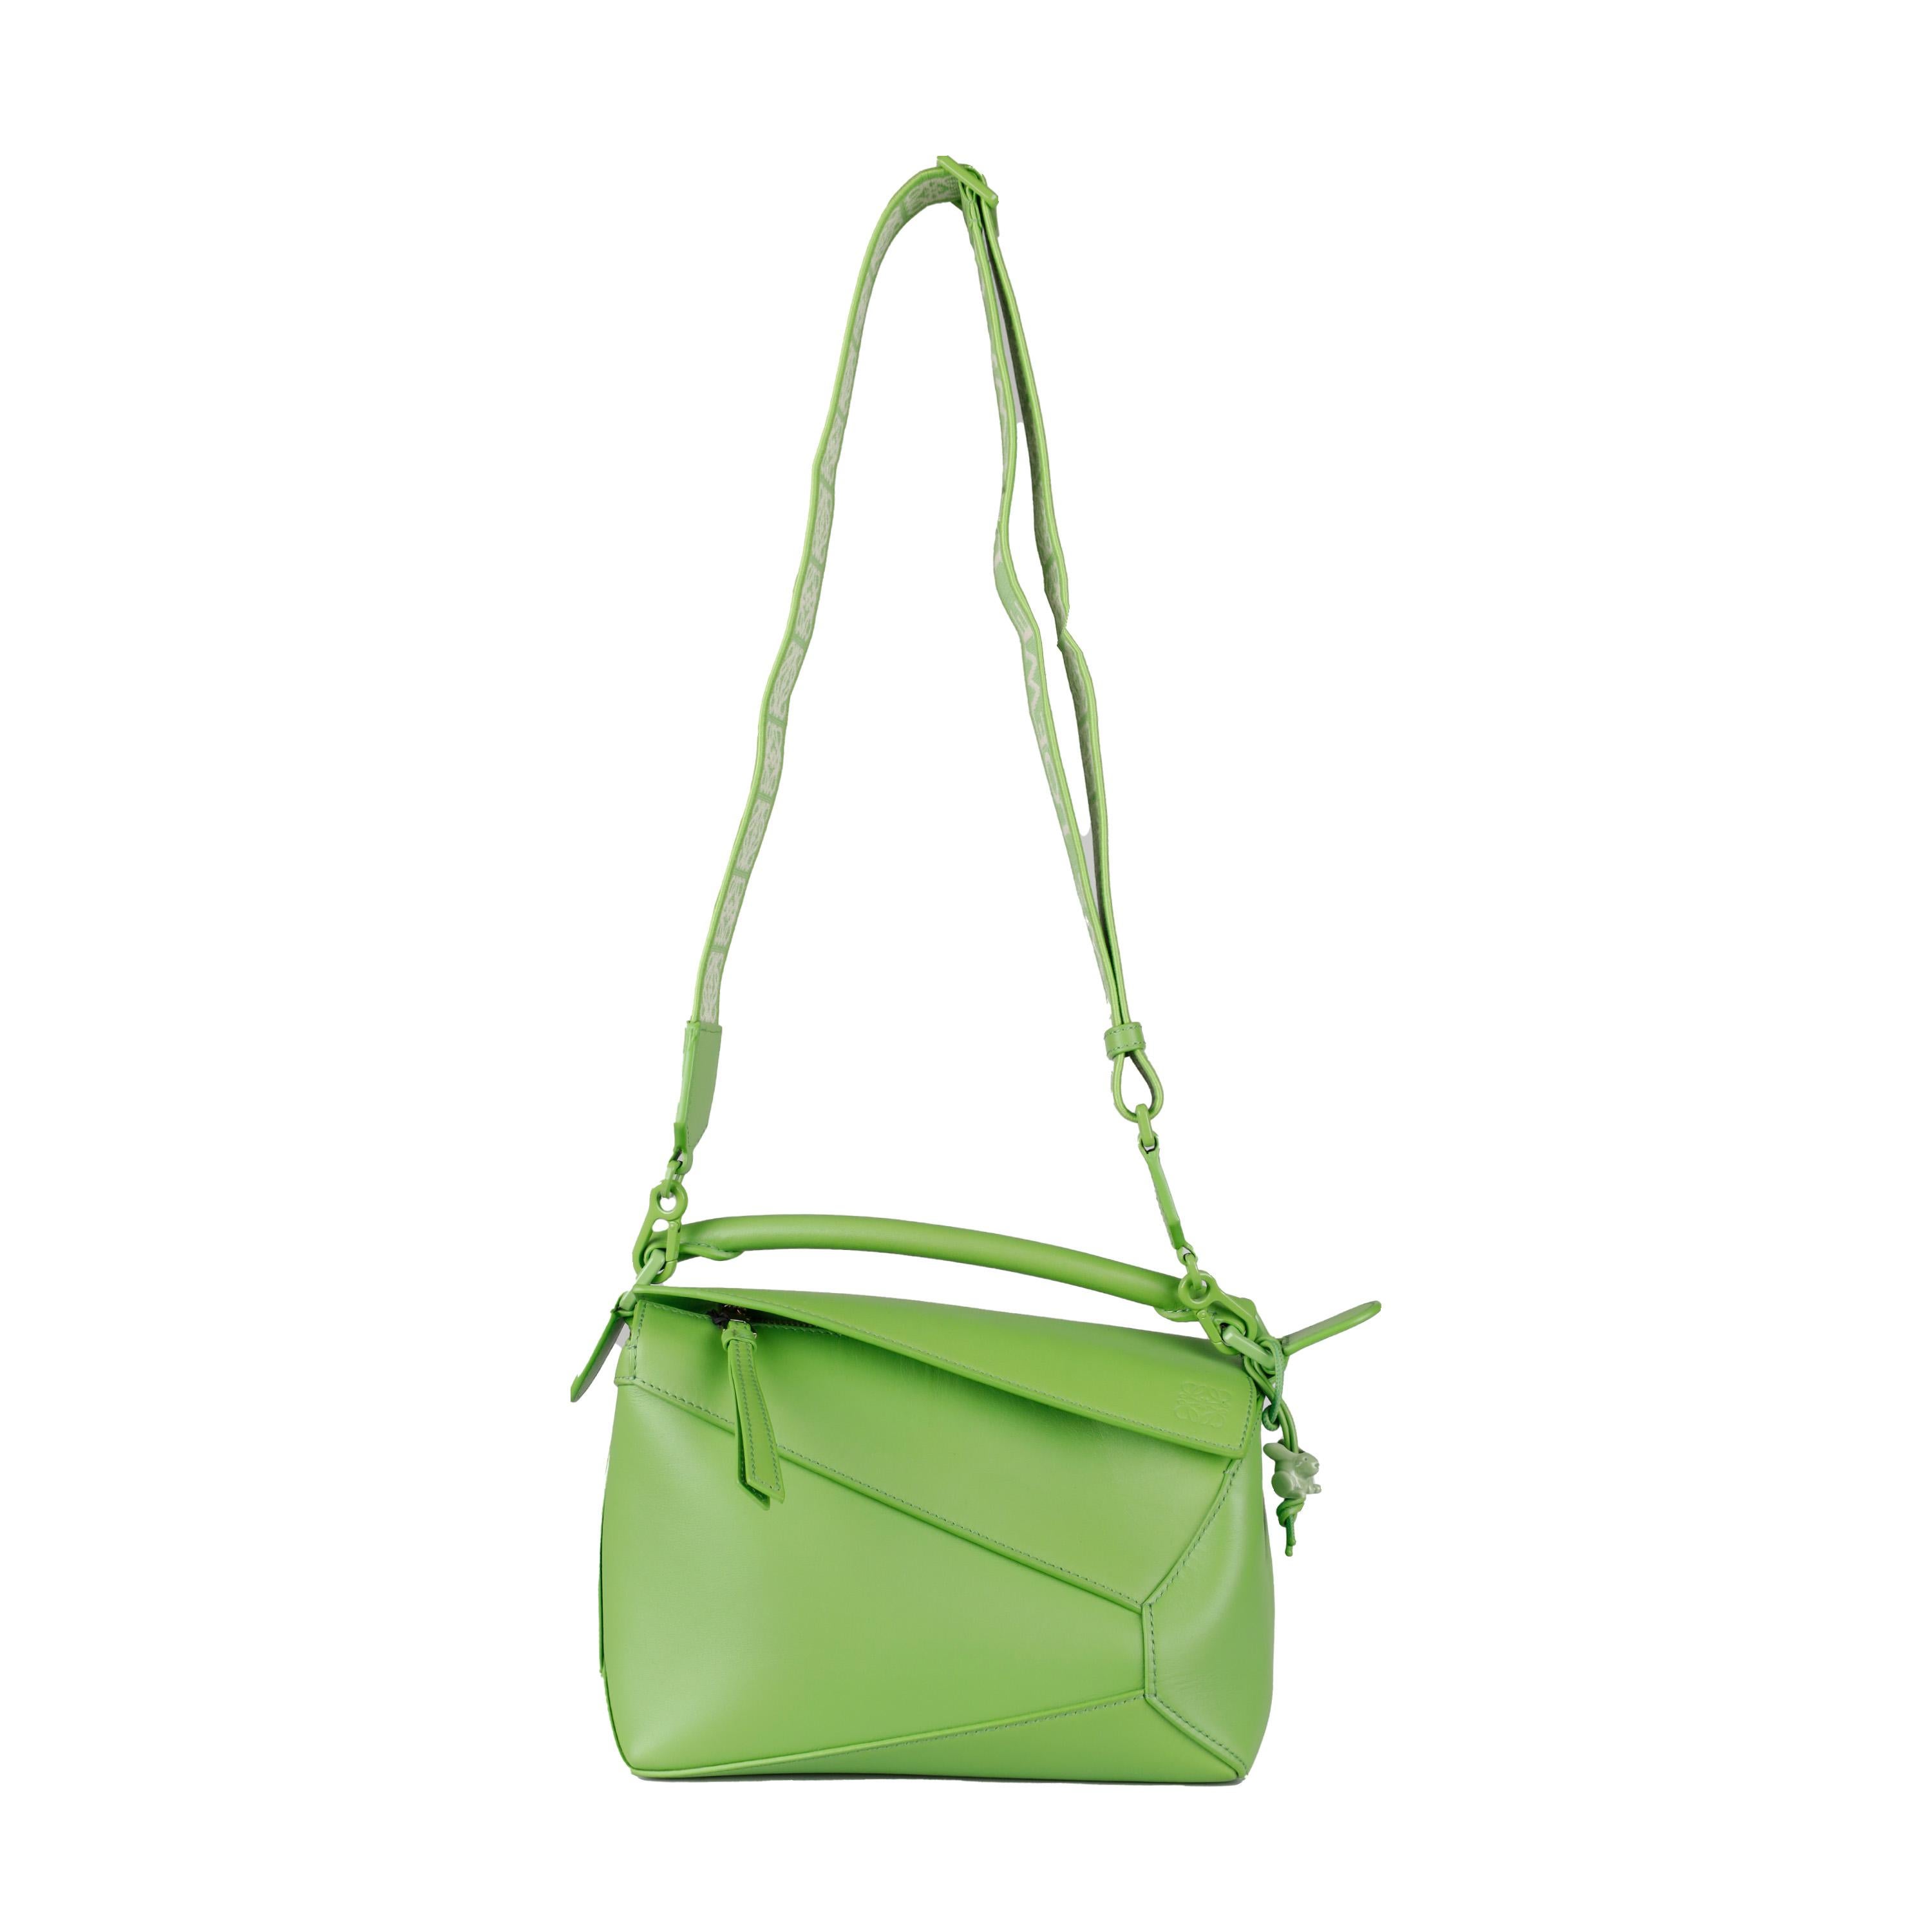 This Loewe Puzzle 'Edge' Small Shoulder Bag features an angular silhouette crafted from premium leather in a vibrant lime green hue. It comes with detachable and adjustable jacquard shoulder strap for versatile wear, and is adorned with a debossed